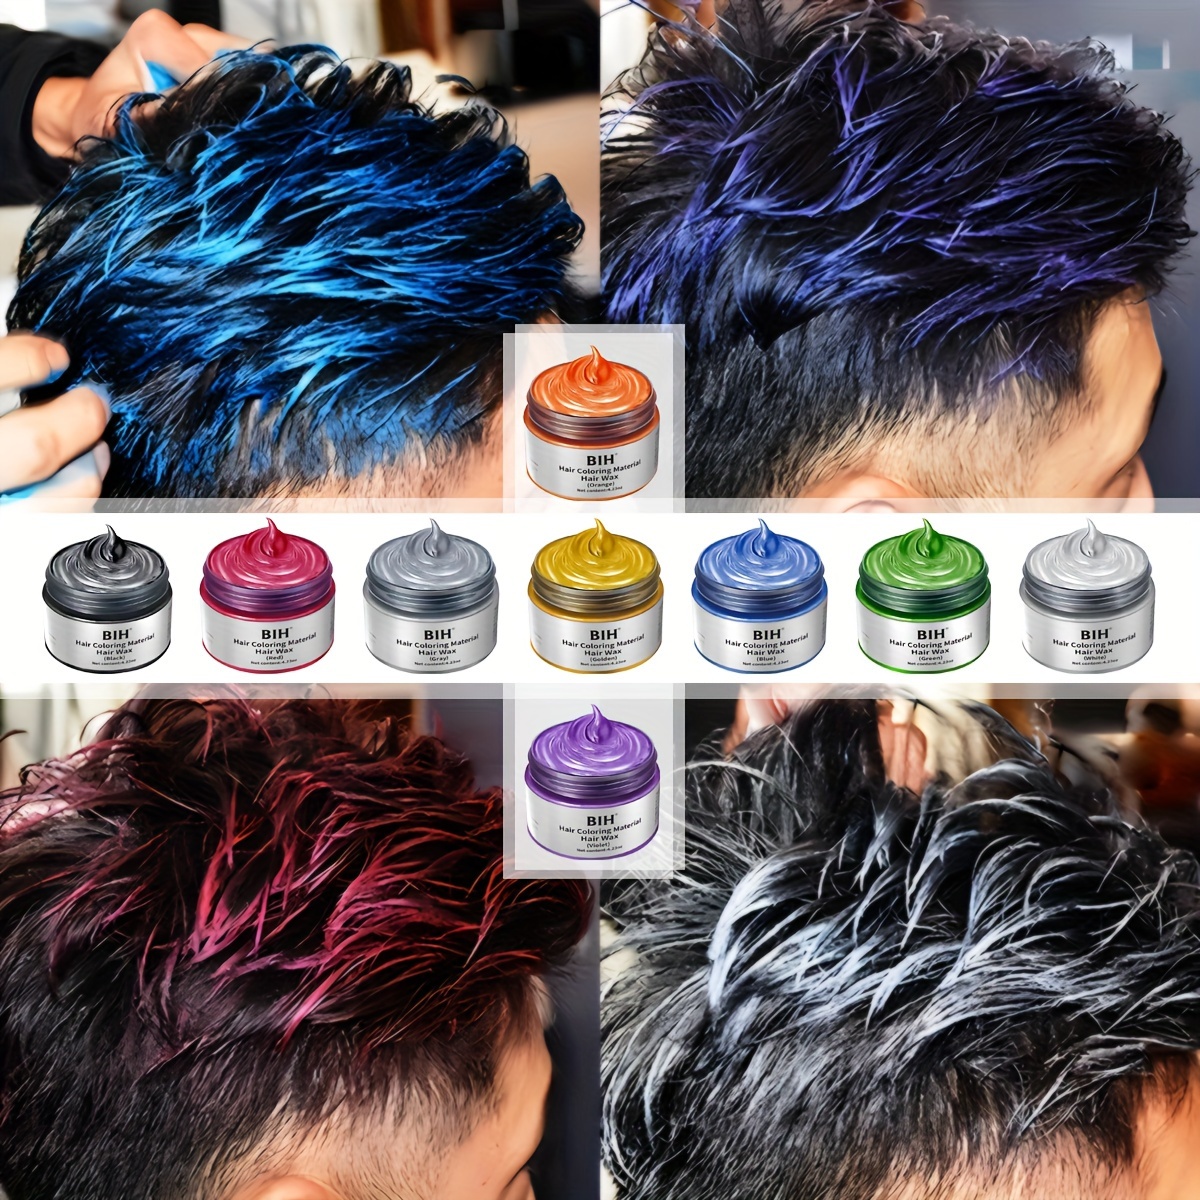 

Temporary Hair Color Mud - Easy Wash, Natural Hold For Daily Styling & Special Occasions - Available In Gray, Black, White, Blue, Purple, Red, Green, Golden Permanent Hair Dye Hair Dye Accessories